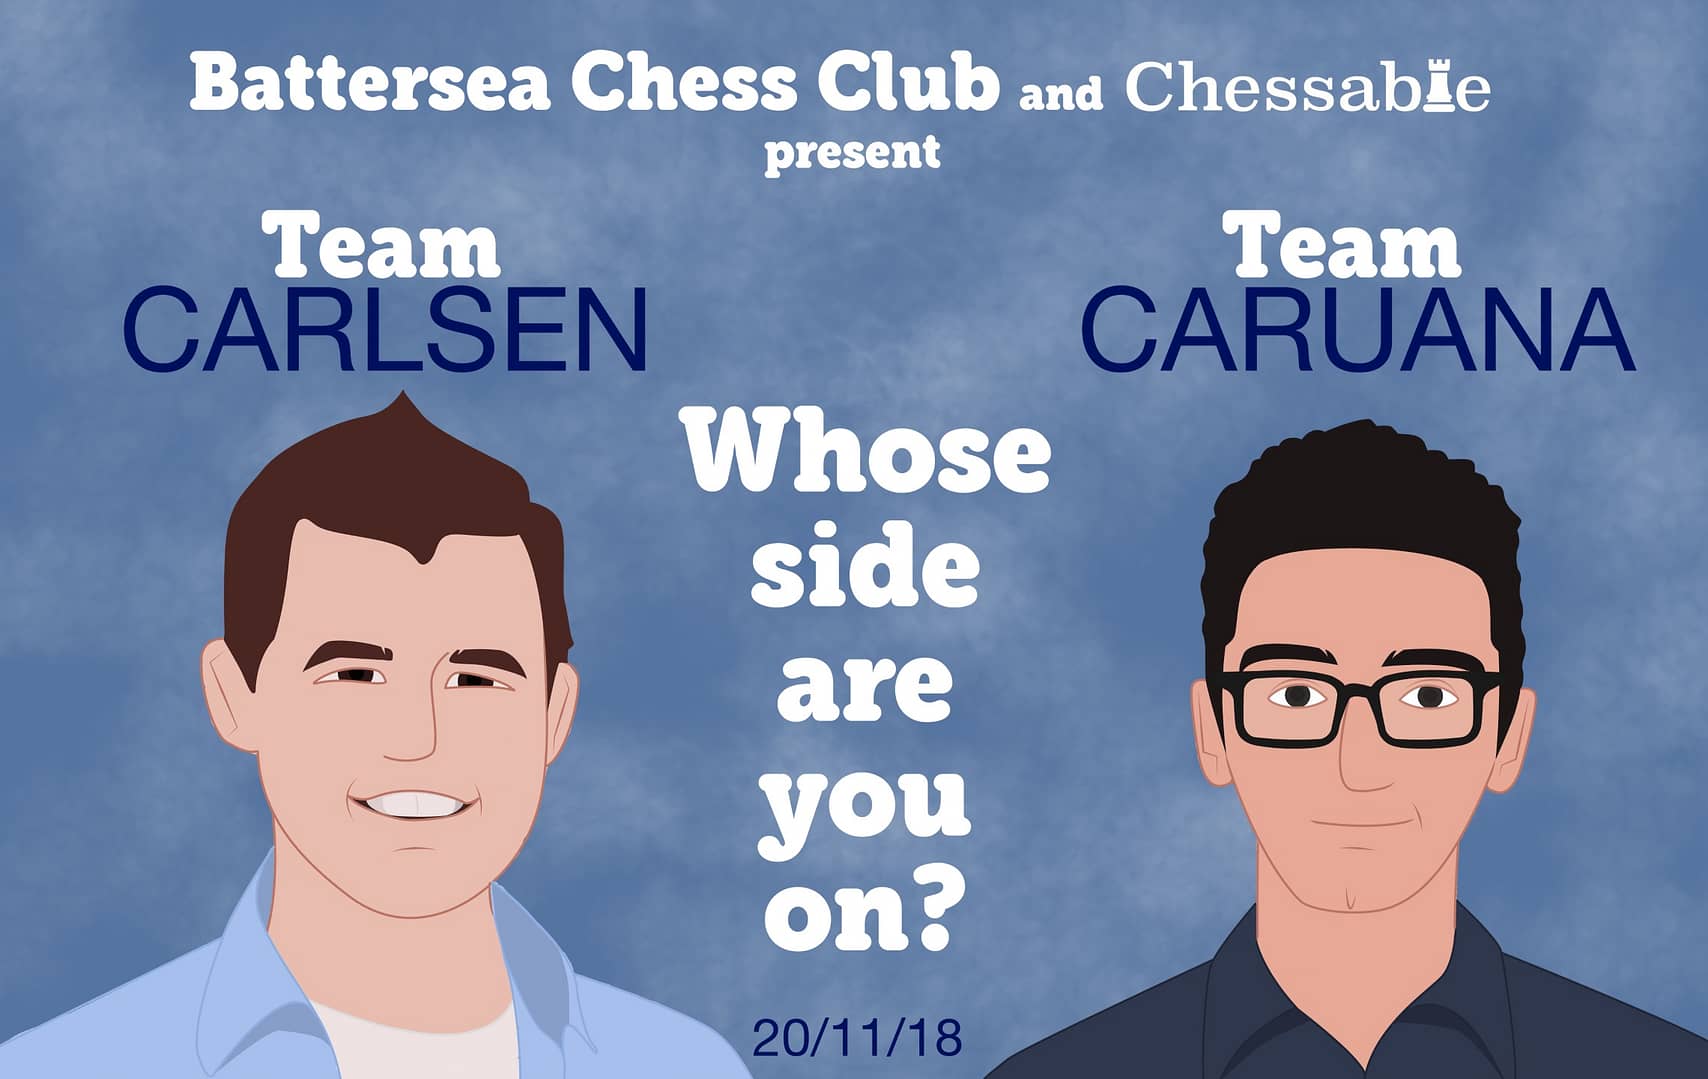 7 masters CONFIRMED + £700 prize pot: Our Carlsen V Caruana night with Chessable